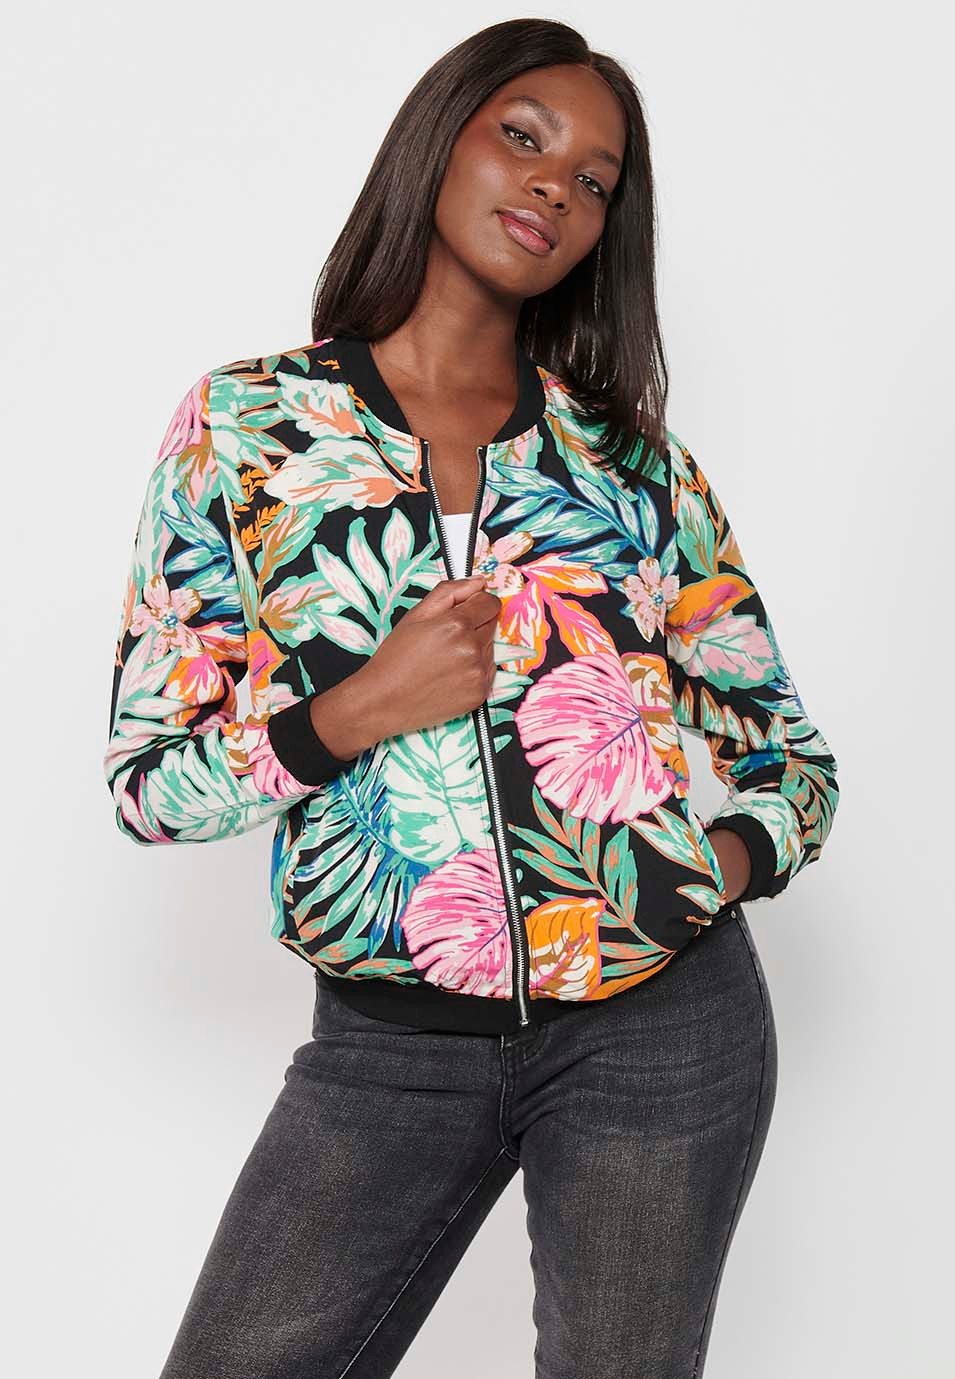 Long-sleeved sweatshirt jacket with ribbed finishes and floral print with front zipper closure. Composition 100% Polyester. Multicolor Color for Women from the Koröshi brand 5